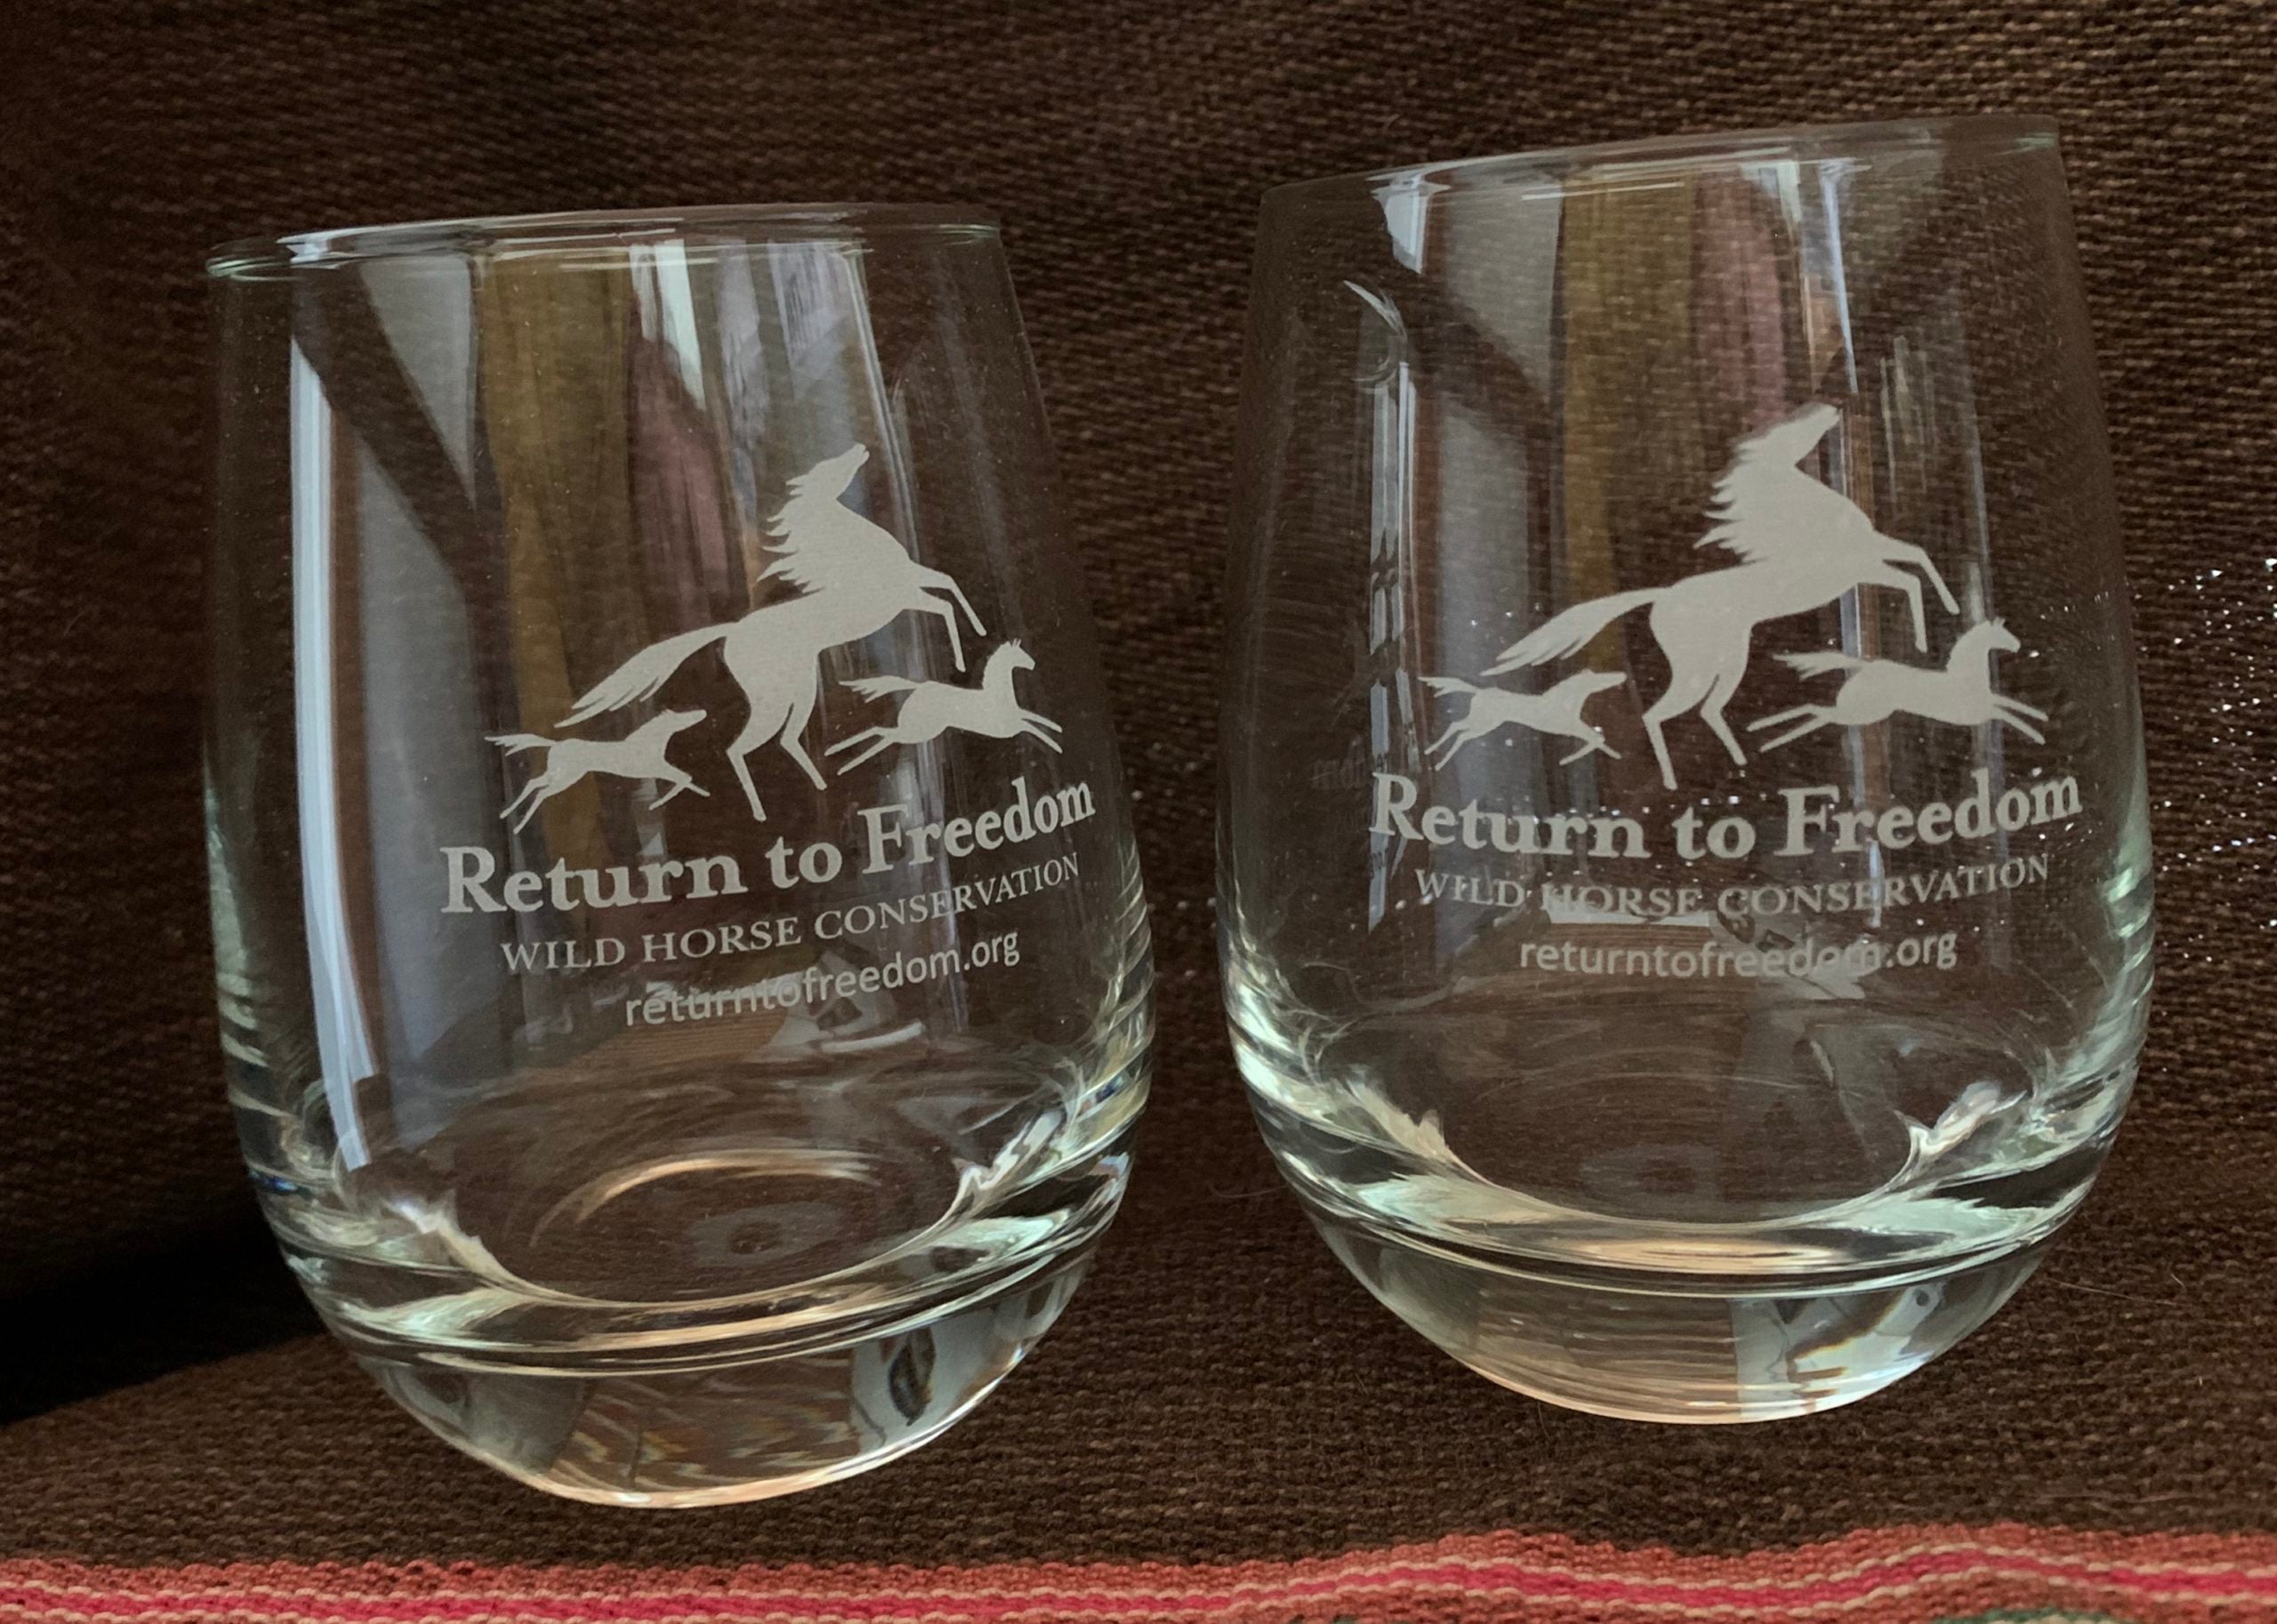 RETURN TO FREEDOM Stemless Wine Glasses - Set of Two